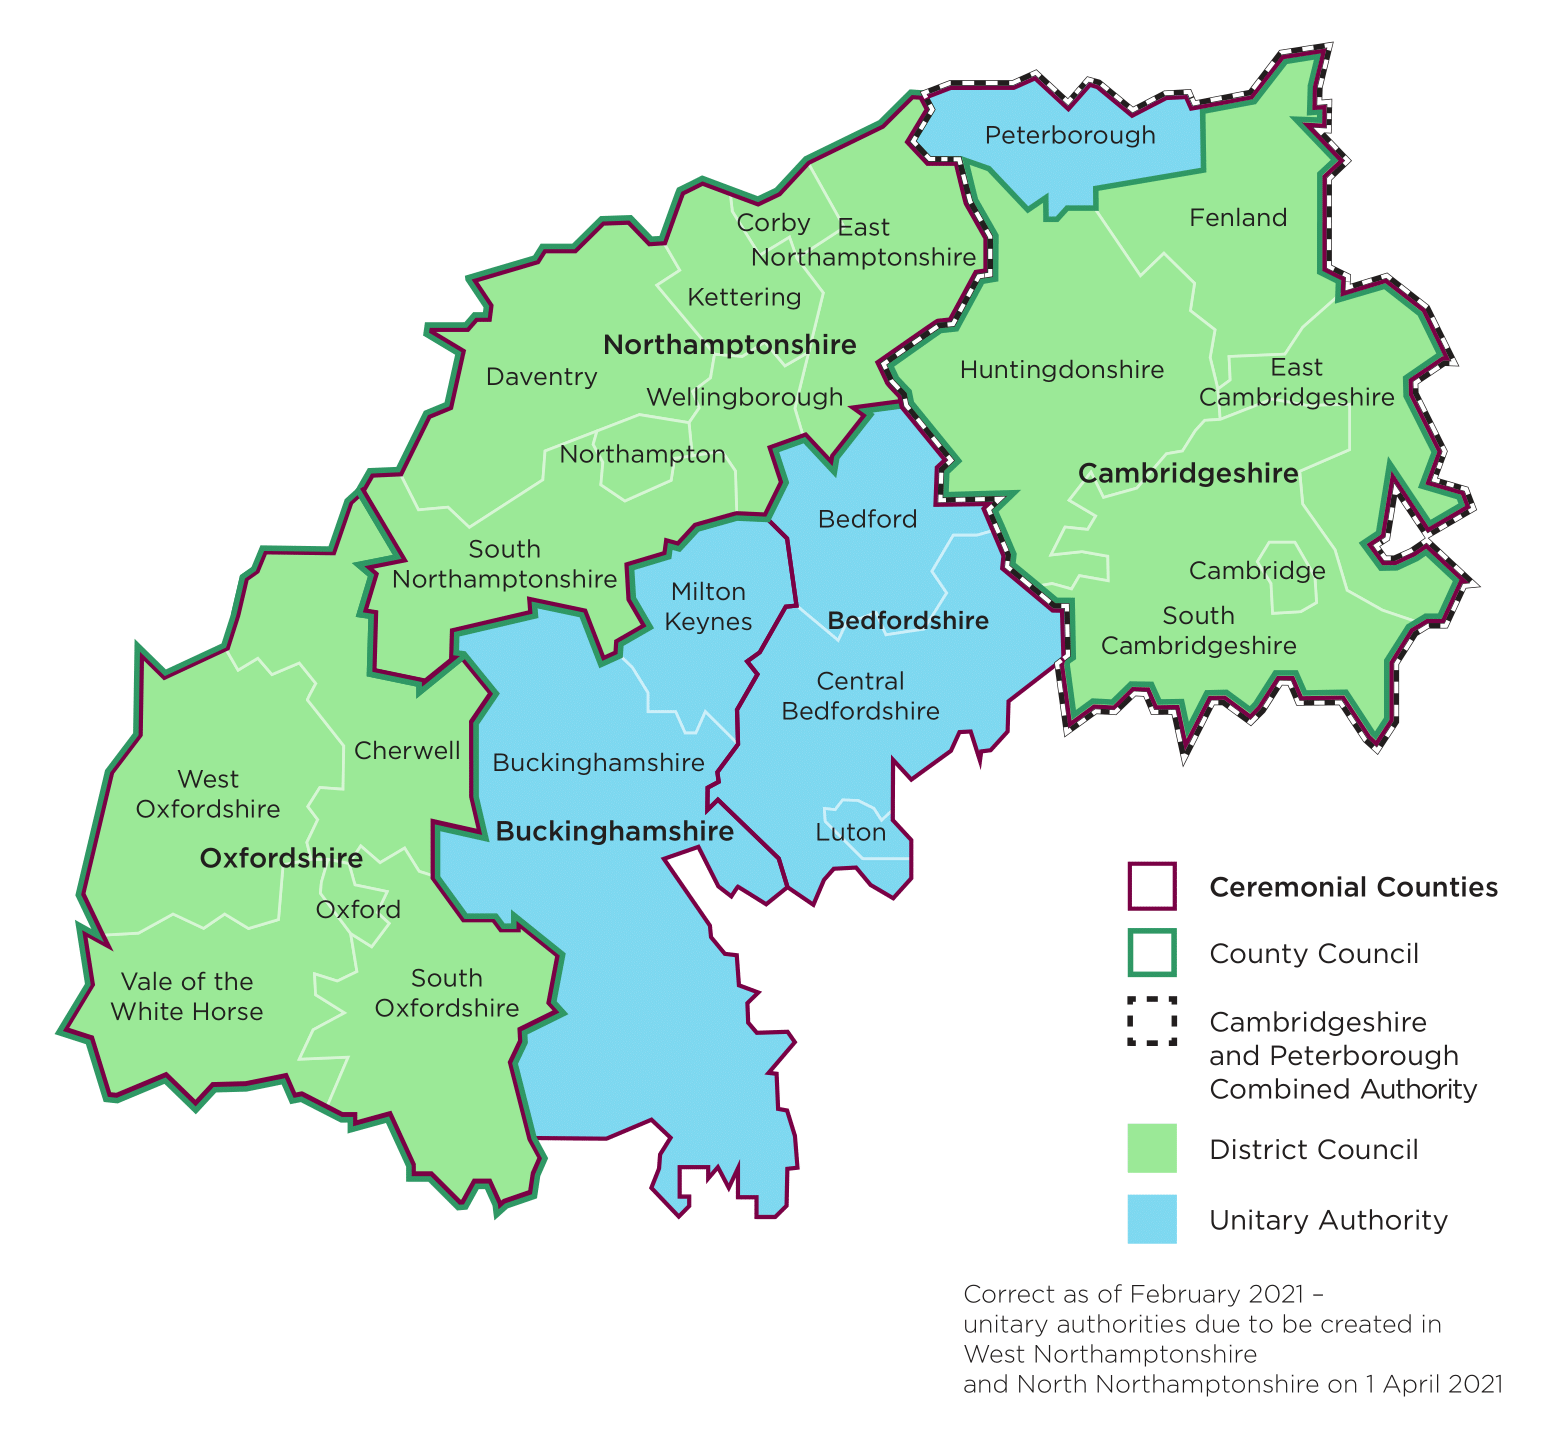 OxCam map showing Bedfordshire, Buckinghamshire, Cambridgeshire, Northamptonshire, Oxfordshire and Peterborough labels the ceremonial counties, county councils, district councils, unitary authorities and Cambridgeshire and Peterborough Combined Authority